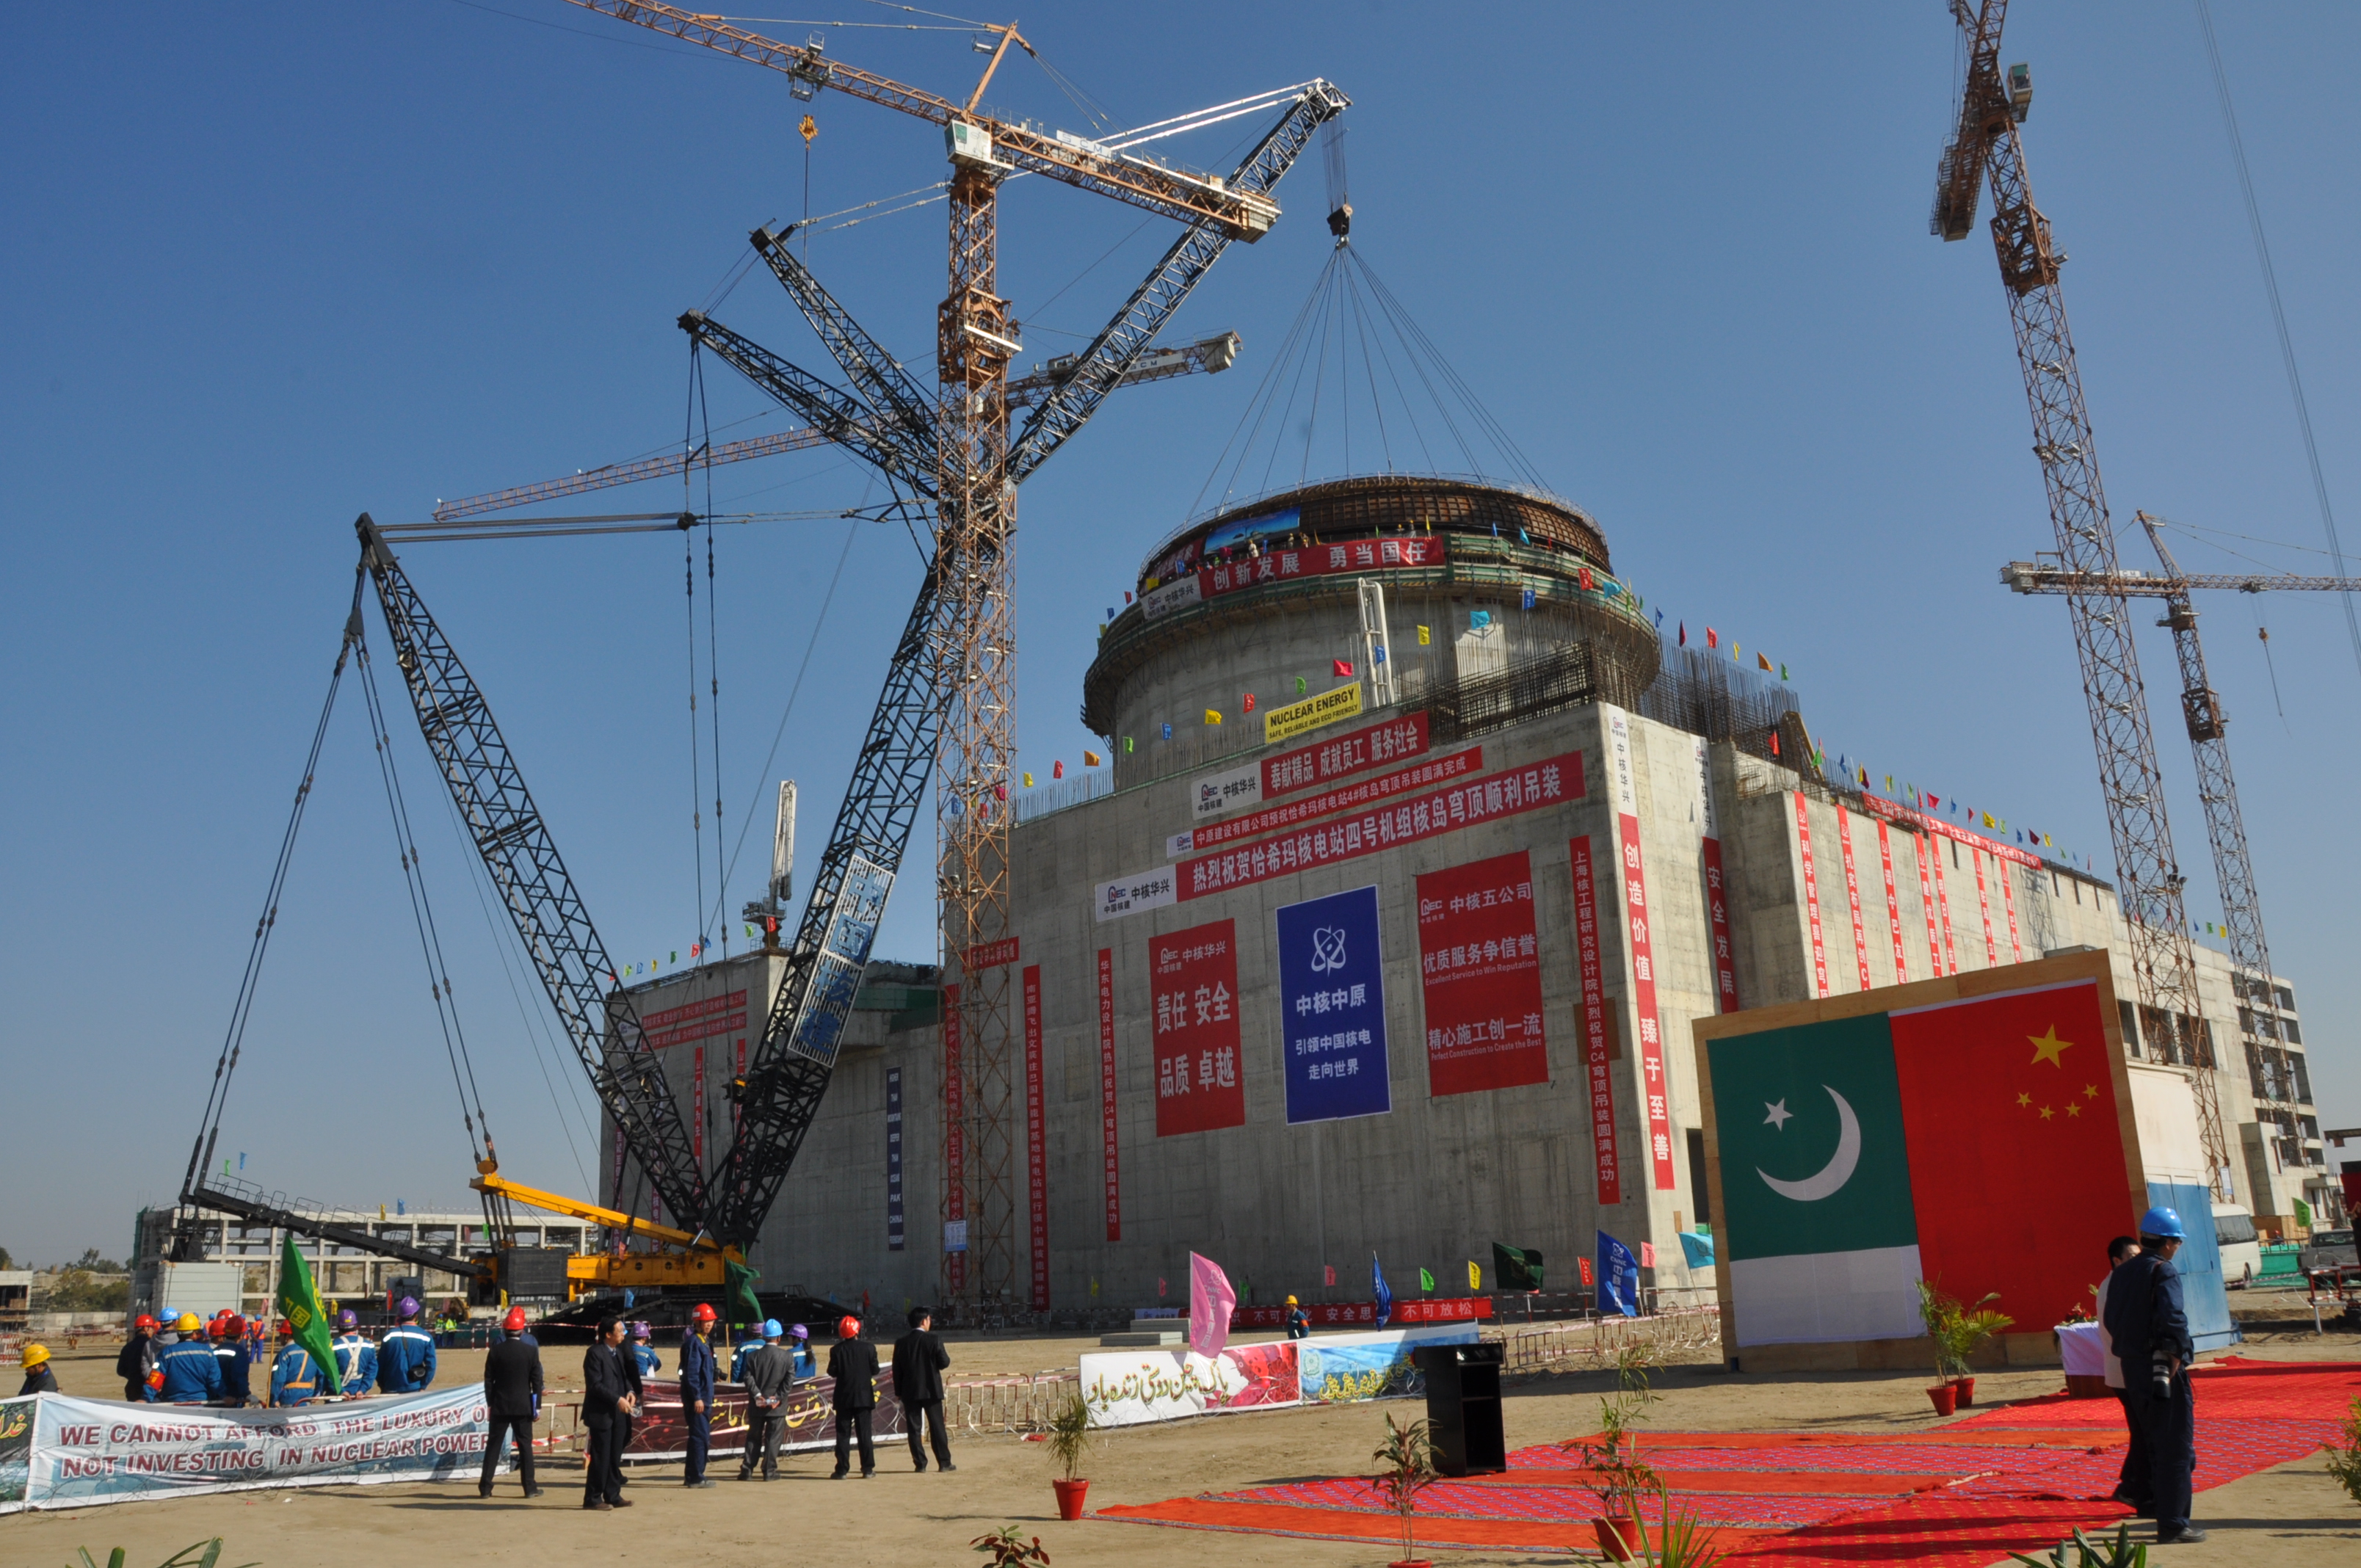 Chashma C-4 Nuclear Power Plant at Chashma, on January 02, 2014